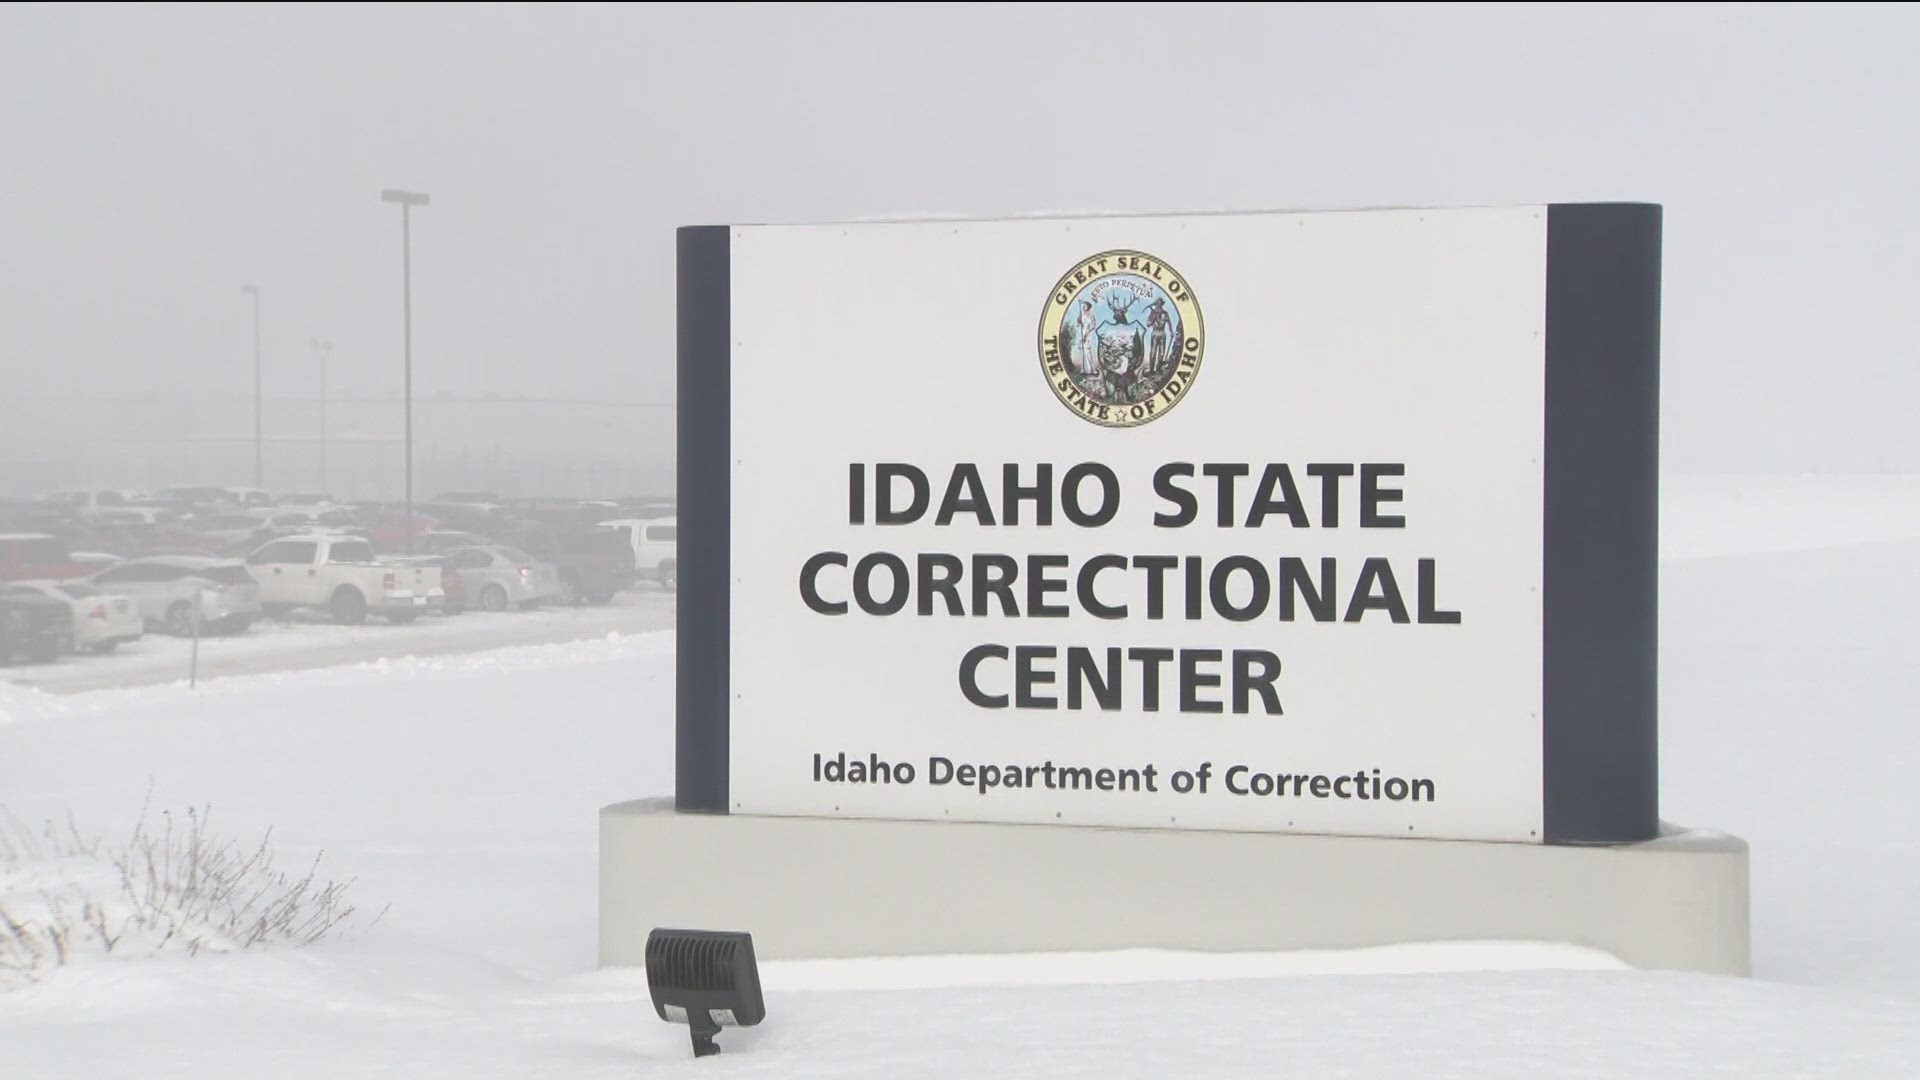 "Anytime we get a significant drop in temperatures it puts a strain on our system," Idaho State Correctional Center Warden Randy Valley said.